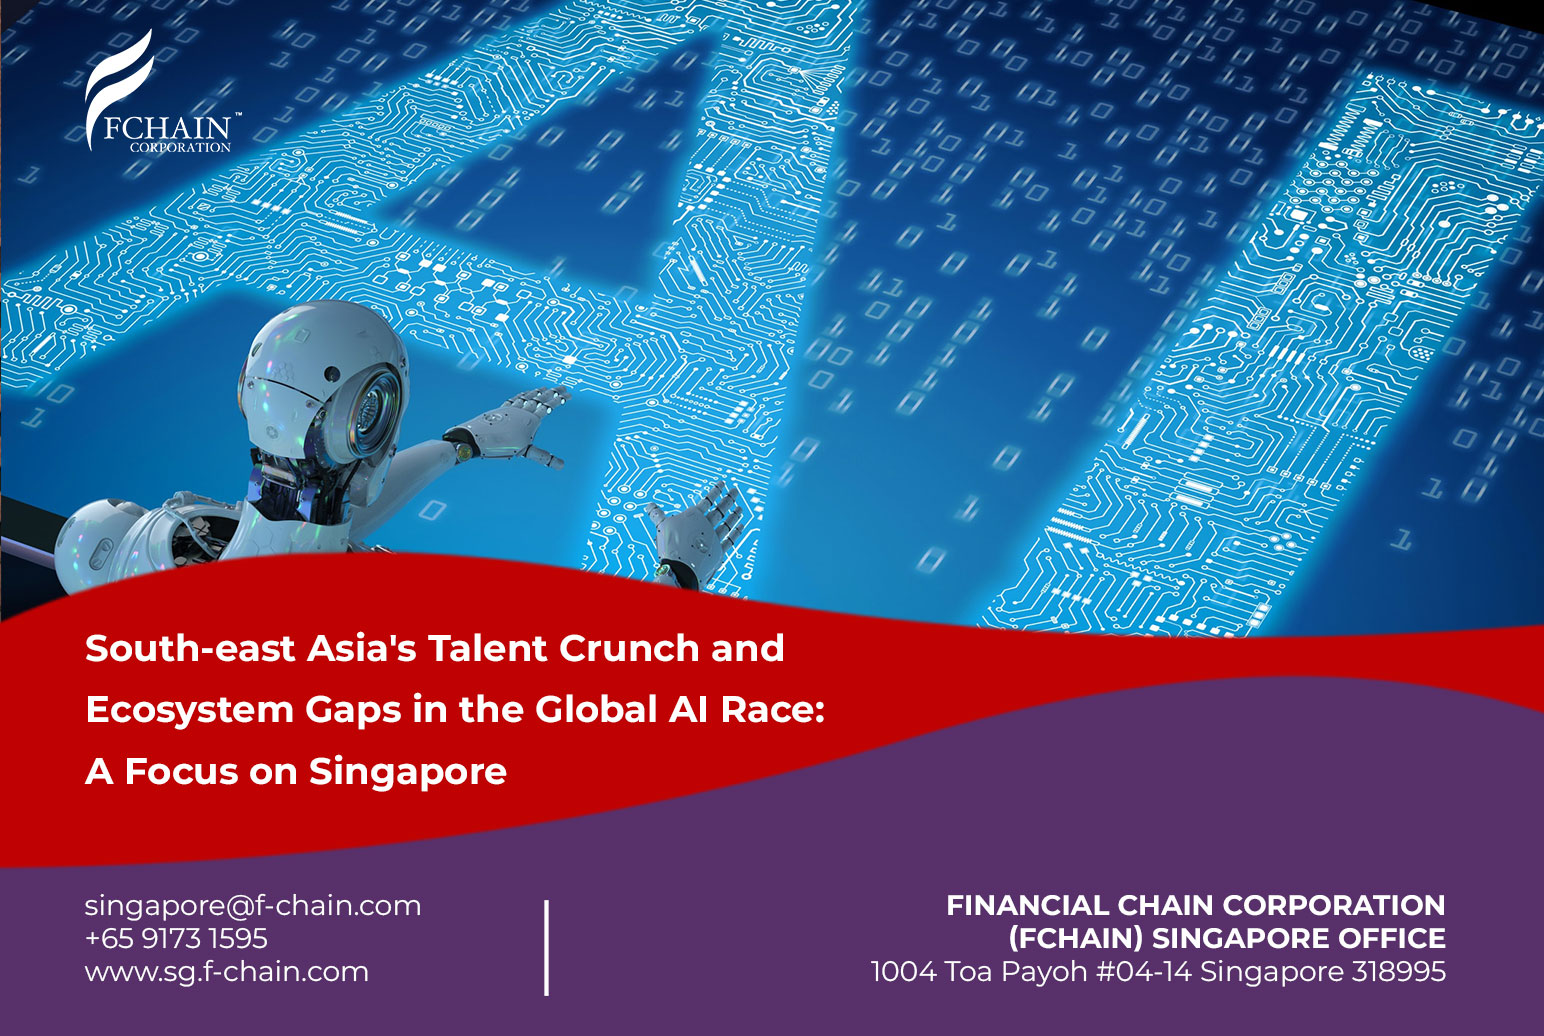 South-east Asia’s Talent Crunch and Ecosystem Gaps in the Global AI Race: A Focus on Singapore